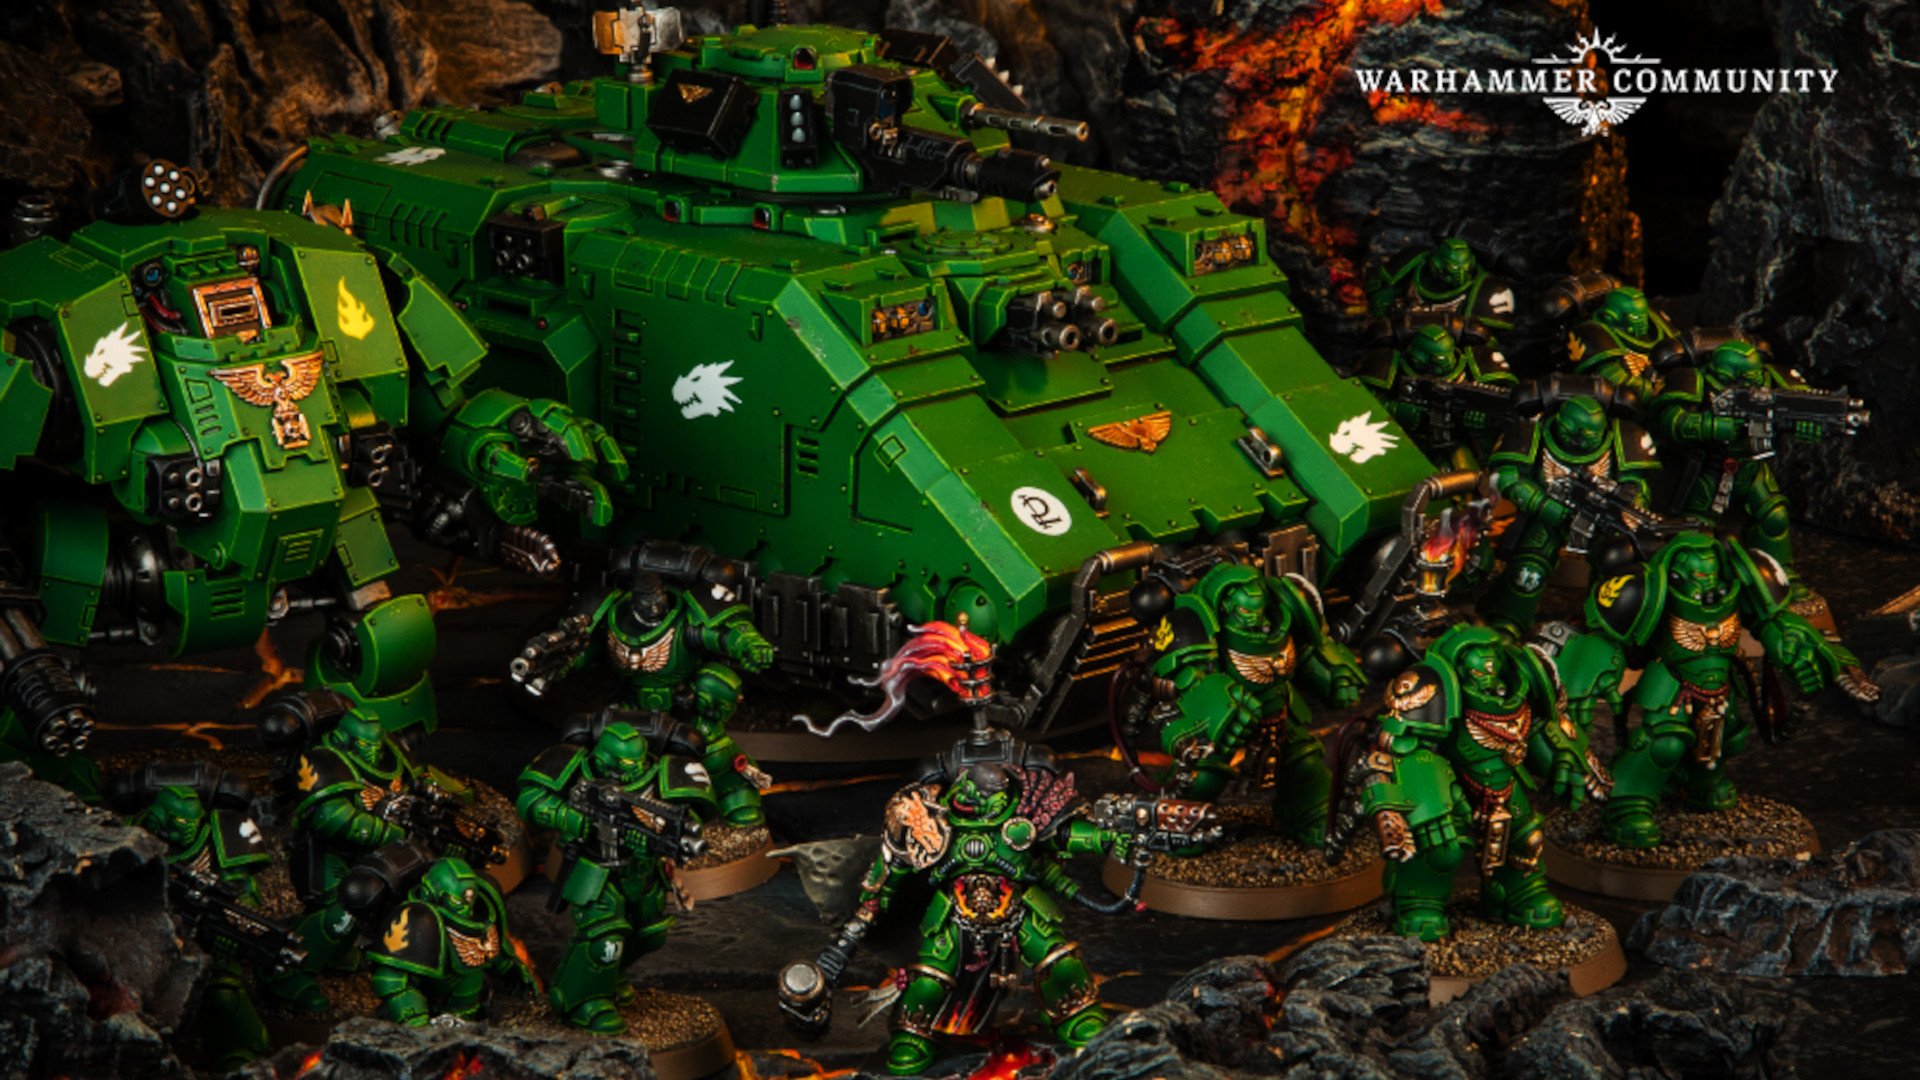 Warhammer 40k Salamanders - diorama photograph by Games Workshop, an army of Primaris Salamanders space marines in Green armour advance in front of their vehicles